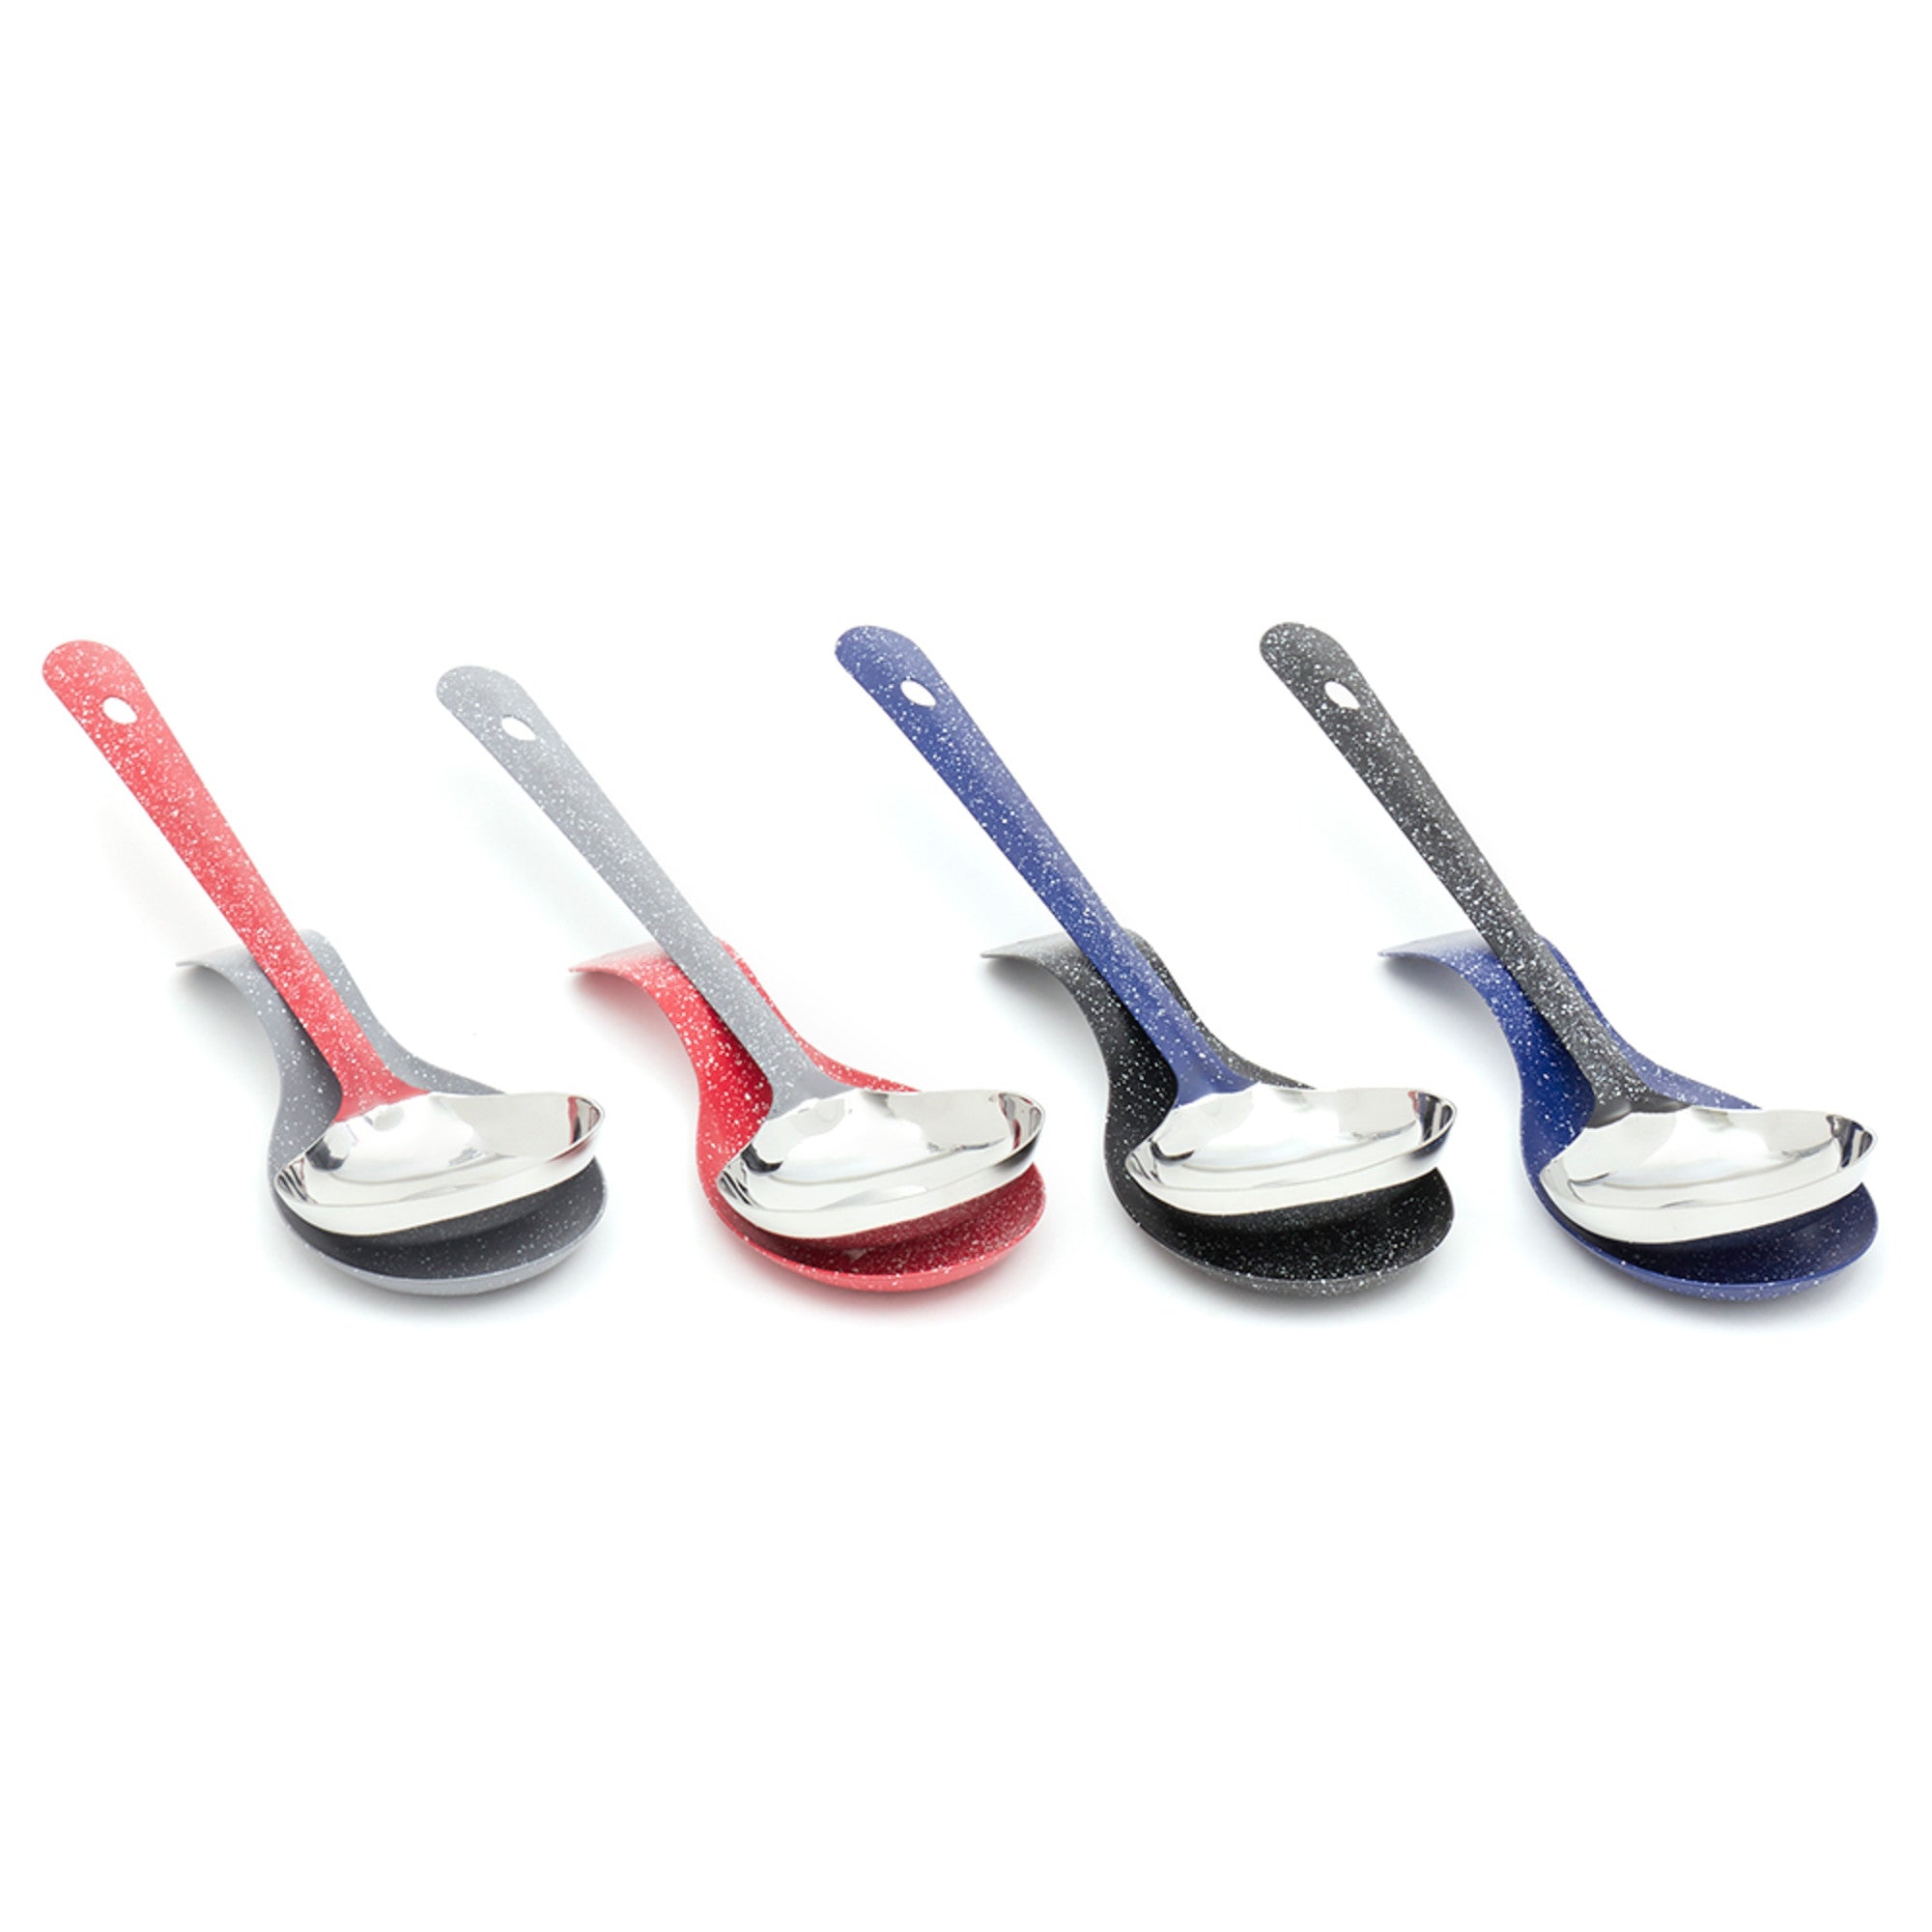 Home Basics Speckled Stainless Steel Ladle - Assorted Colors